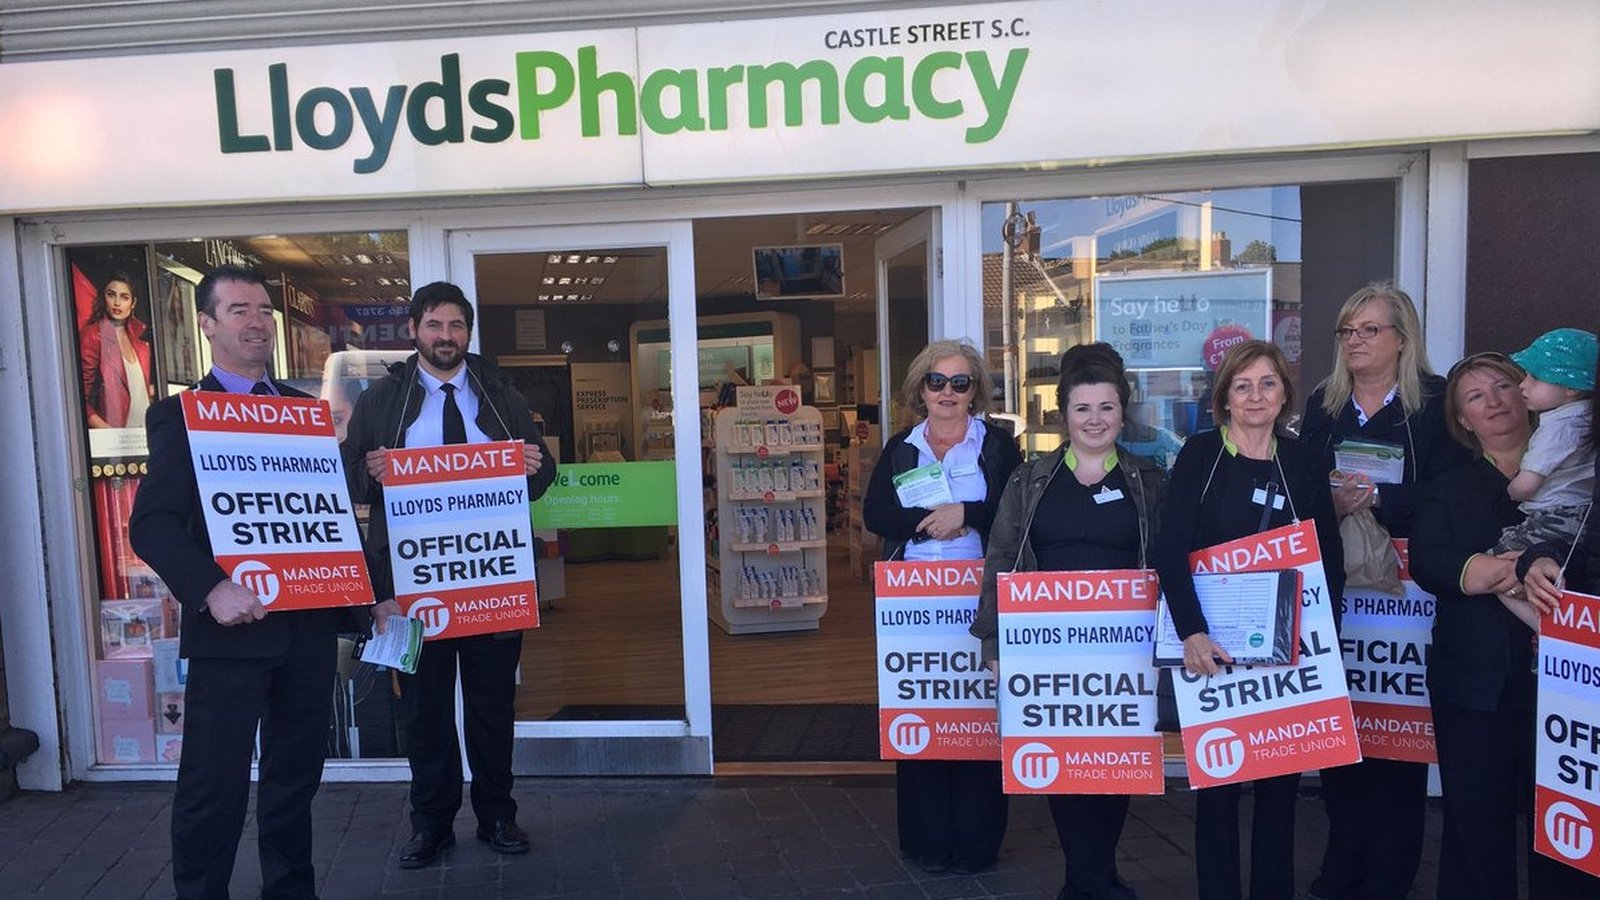 Pharmacy workers strike over union recognition